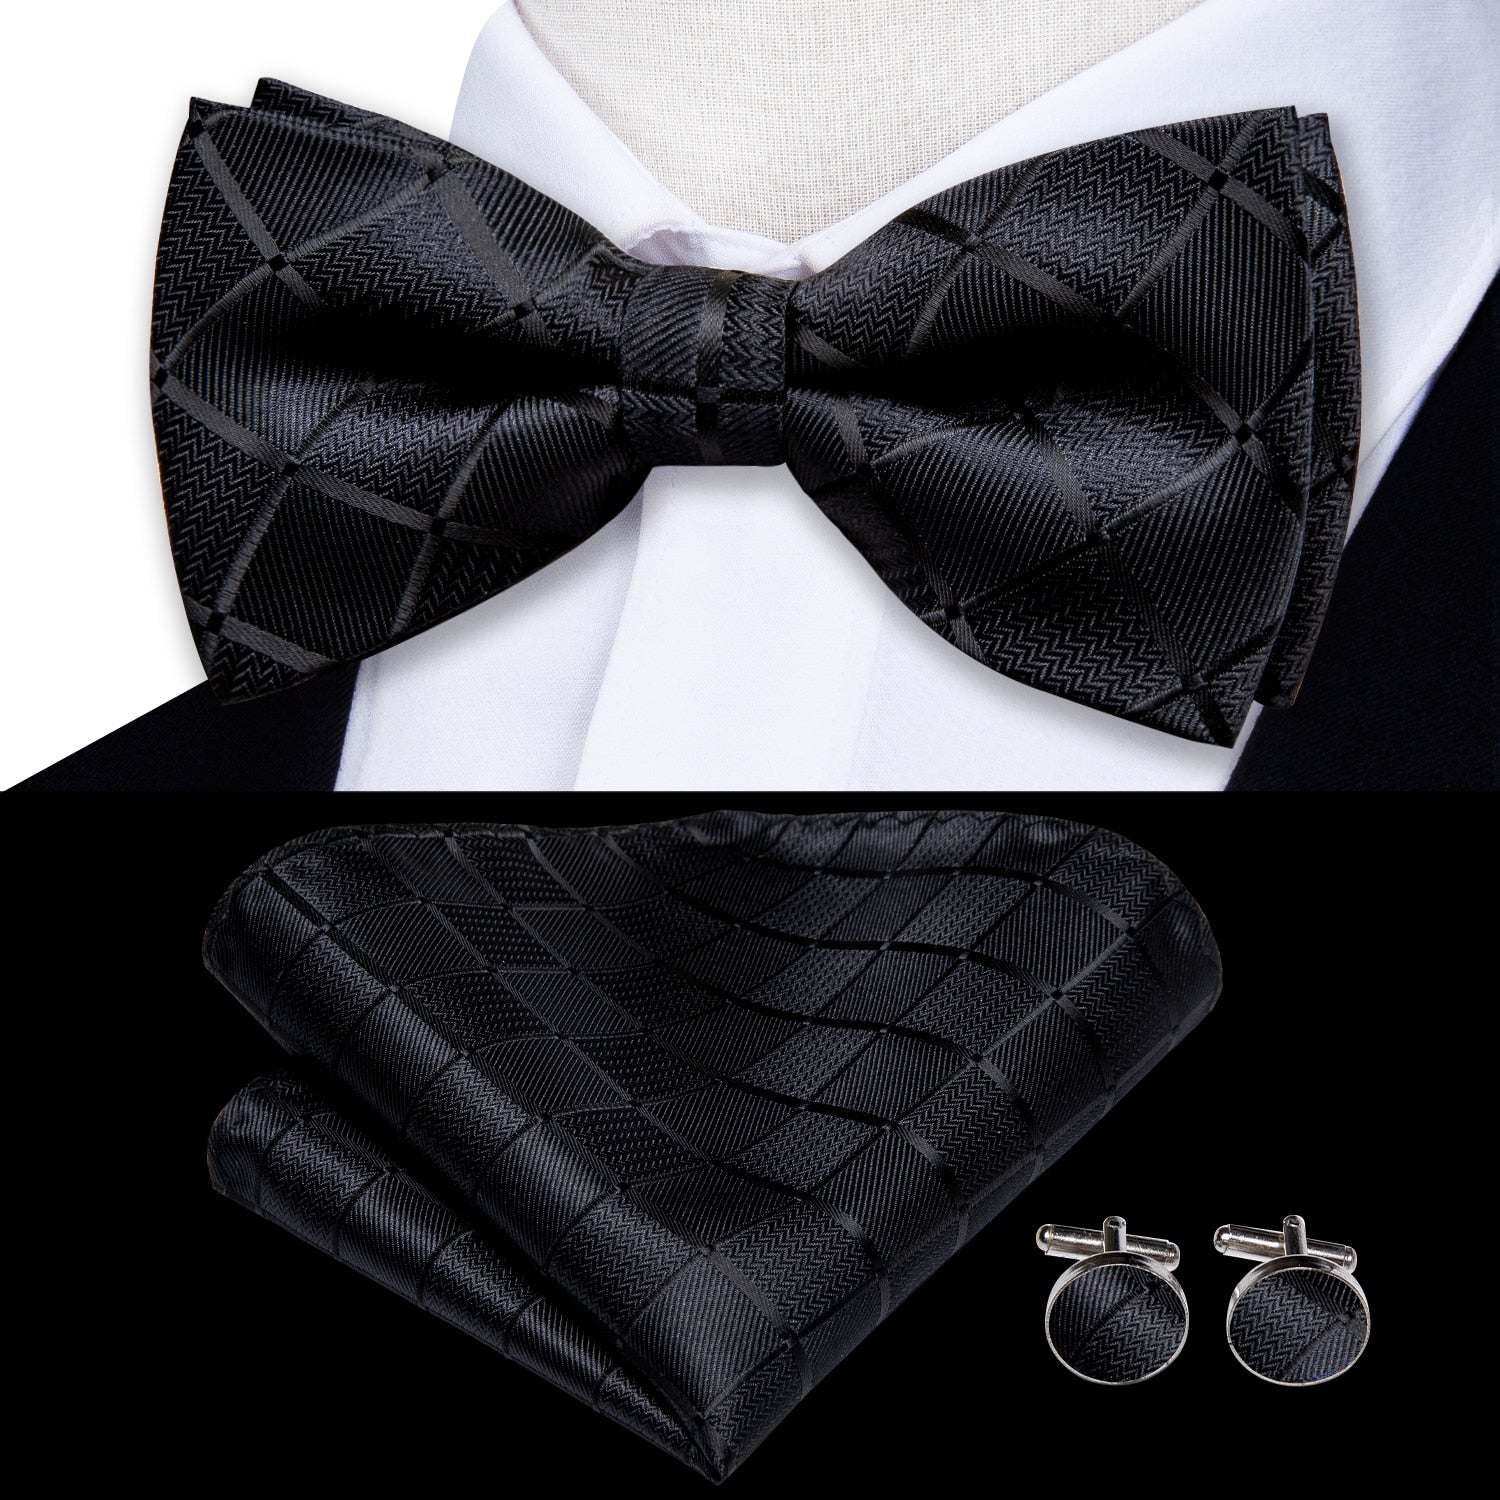 Hi-Tie Classic Black Bow Ties for Men 100% Silk Butterfly Pre-Tied Bow Tie Pocket Square Cufflinks Suit Set Floral Gold Bowties - Bekro's ART